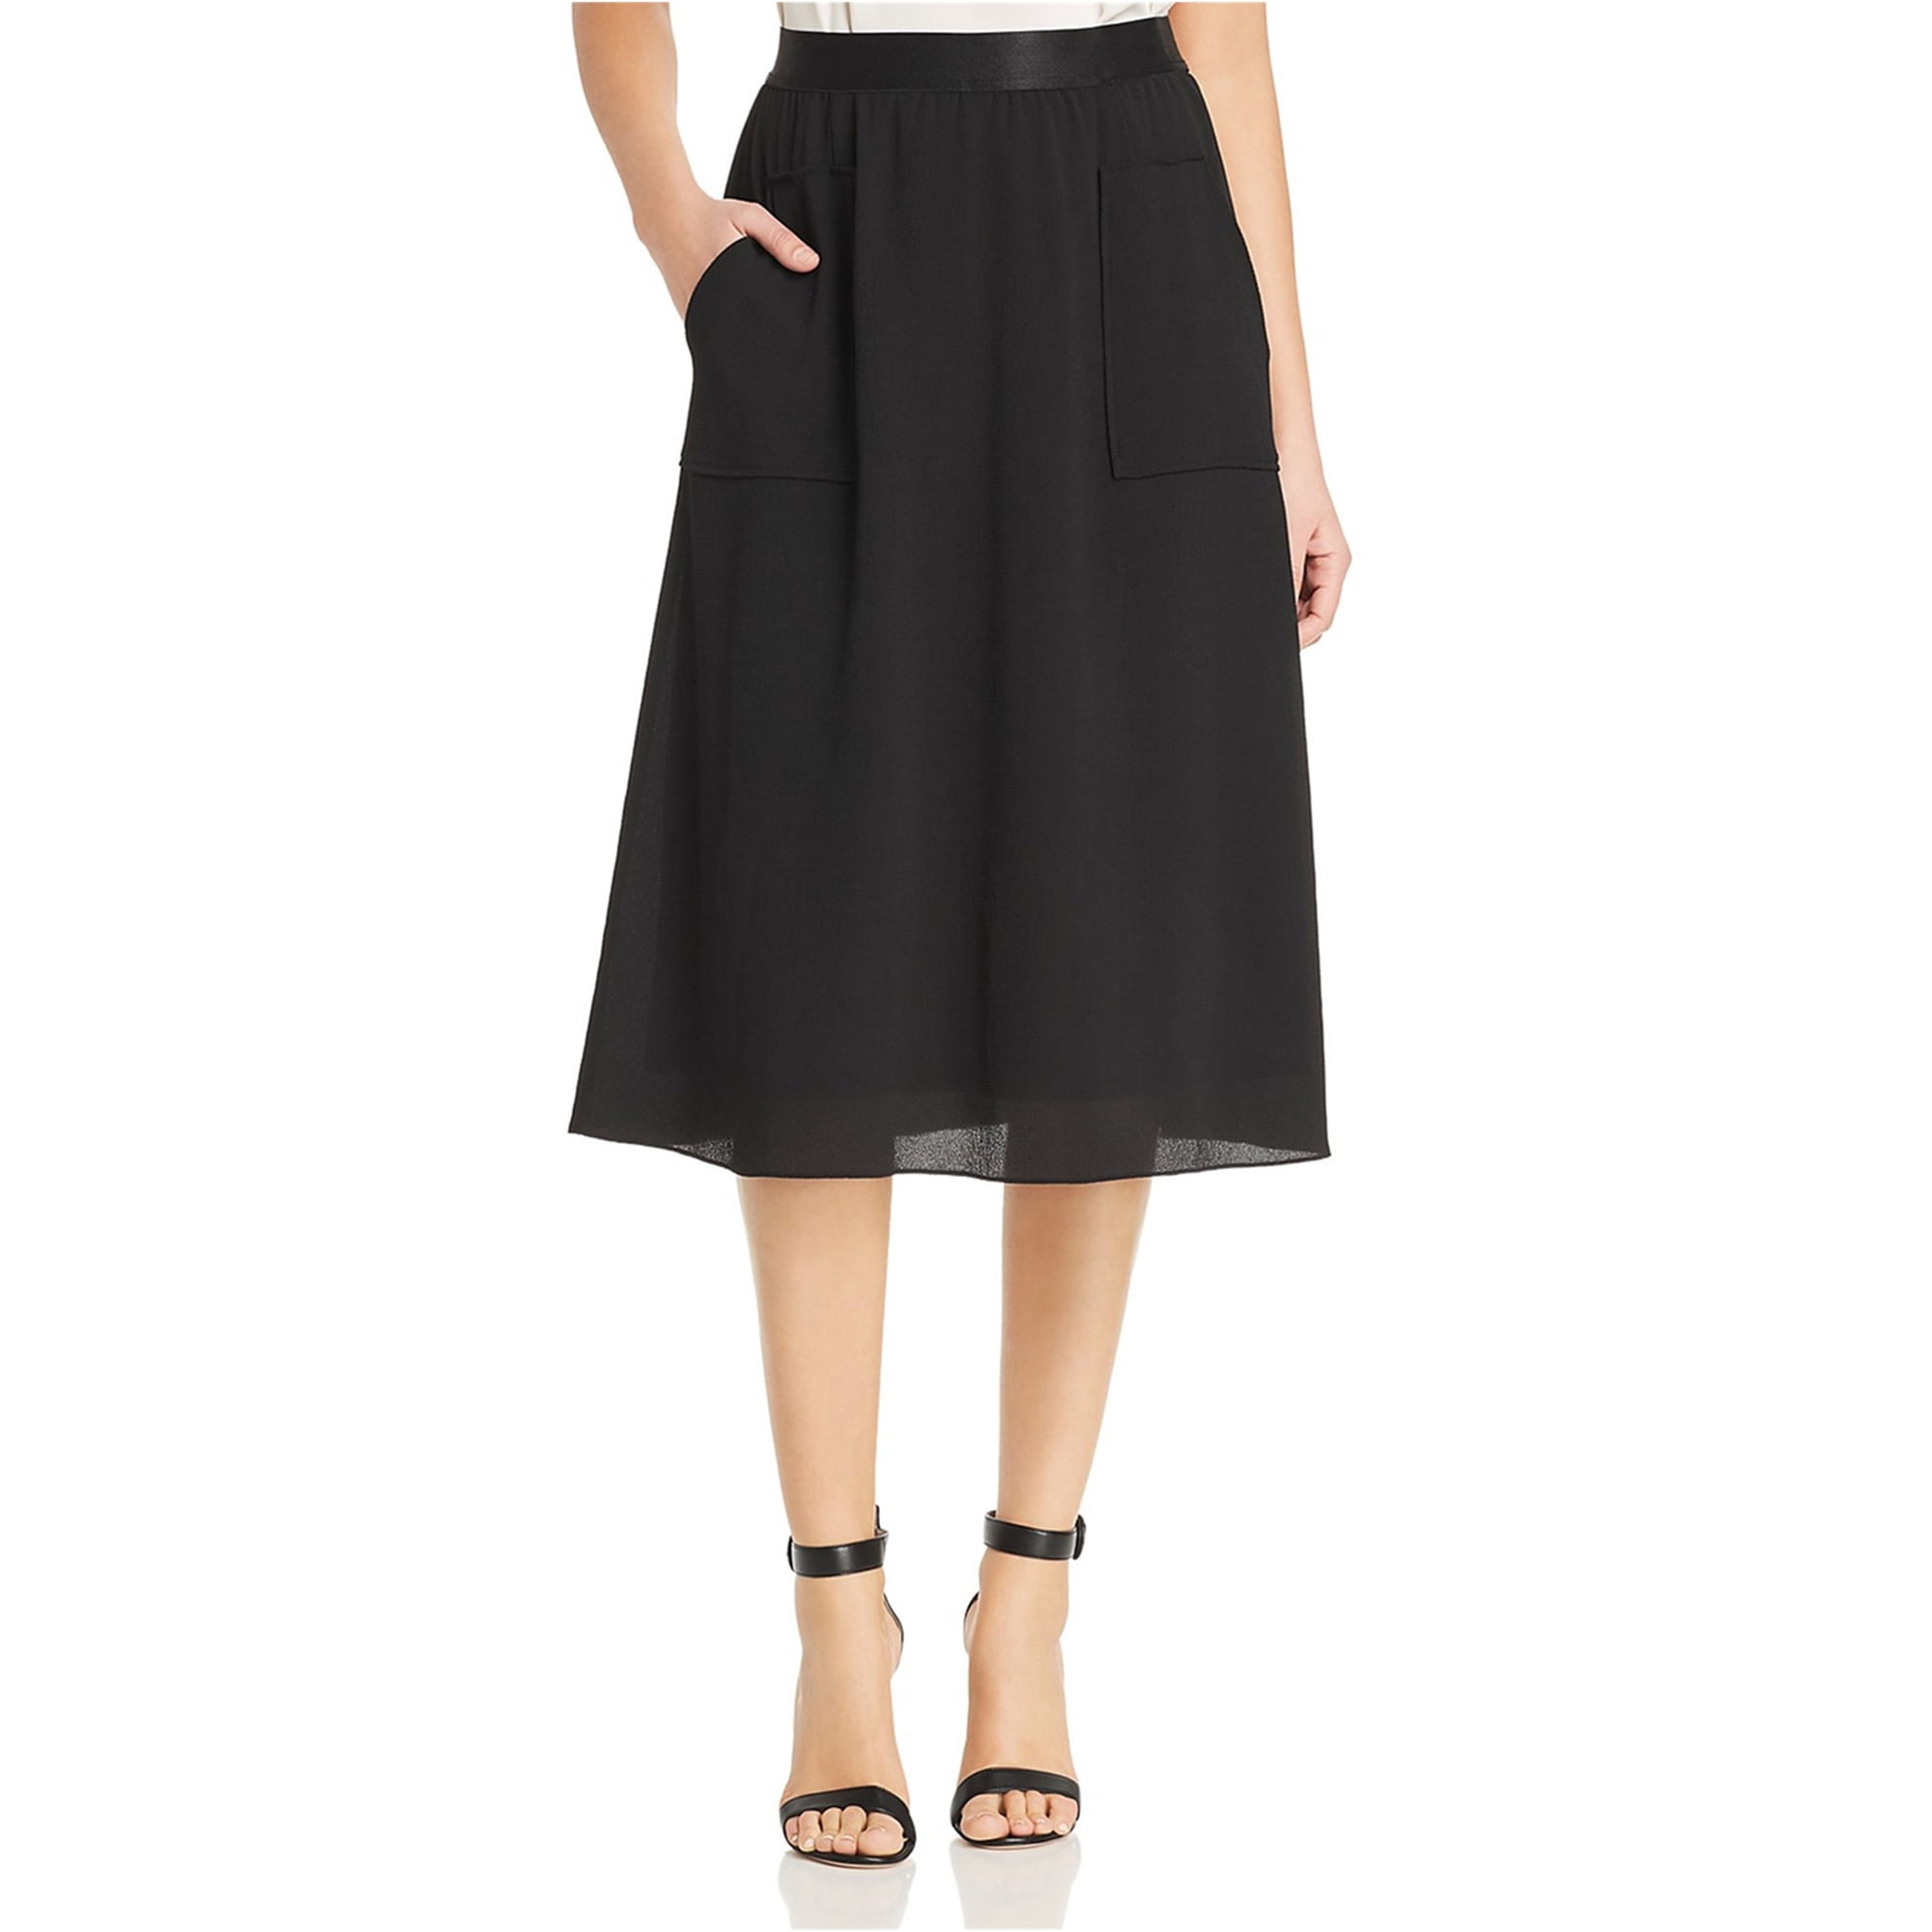 Stretch is Comfort Women's and Plus Size A-Line Skirt with Pockets